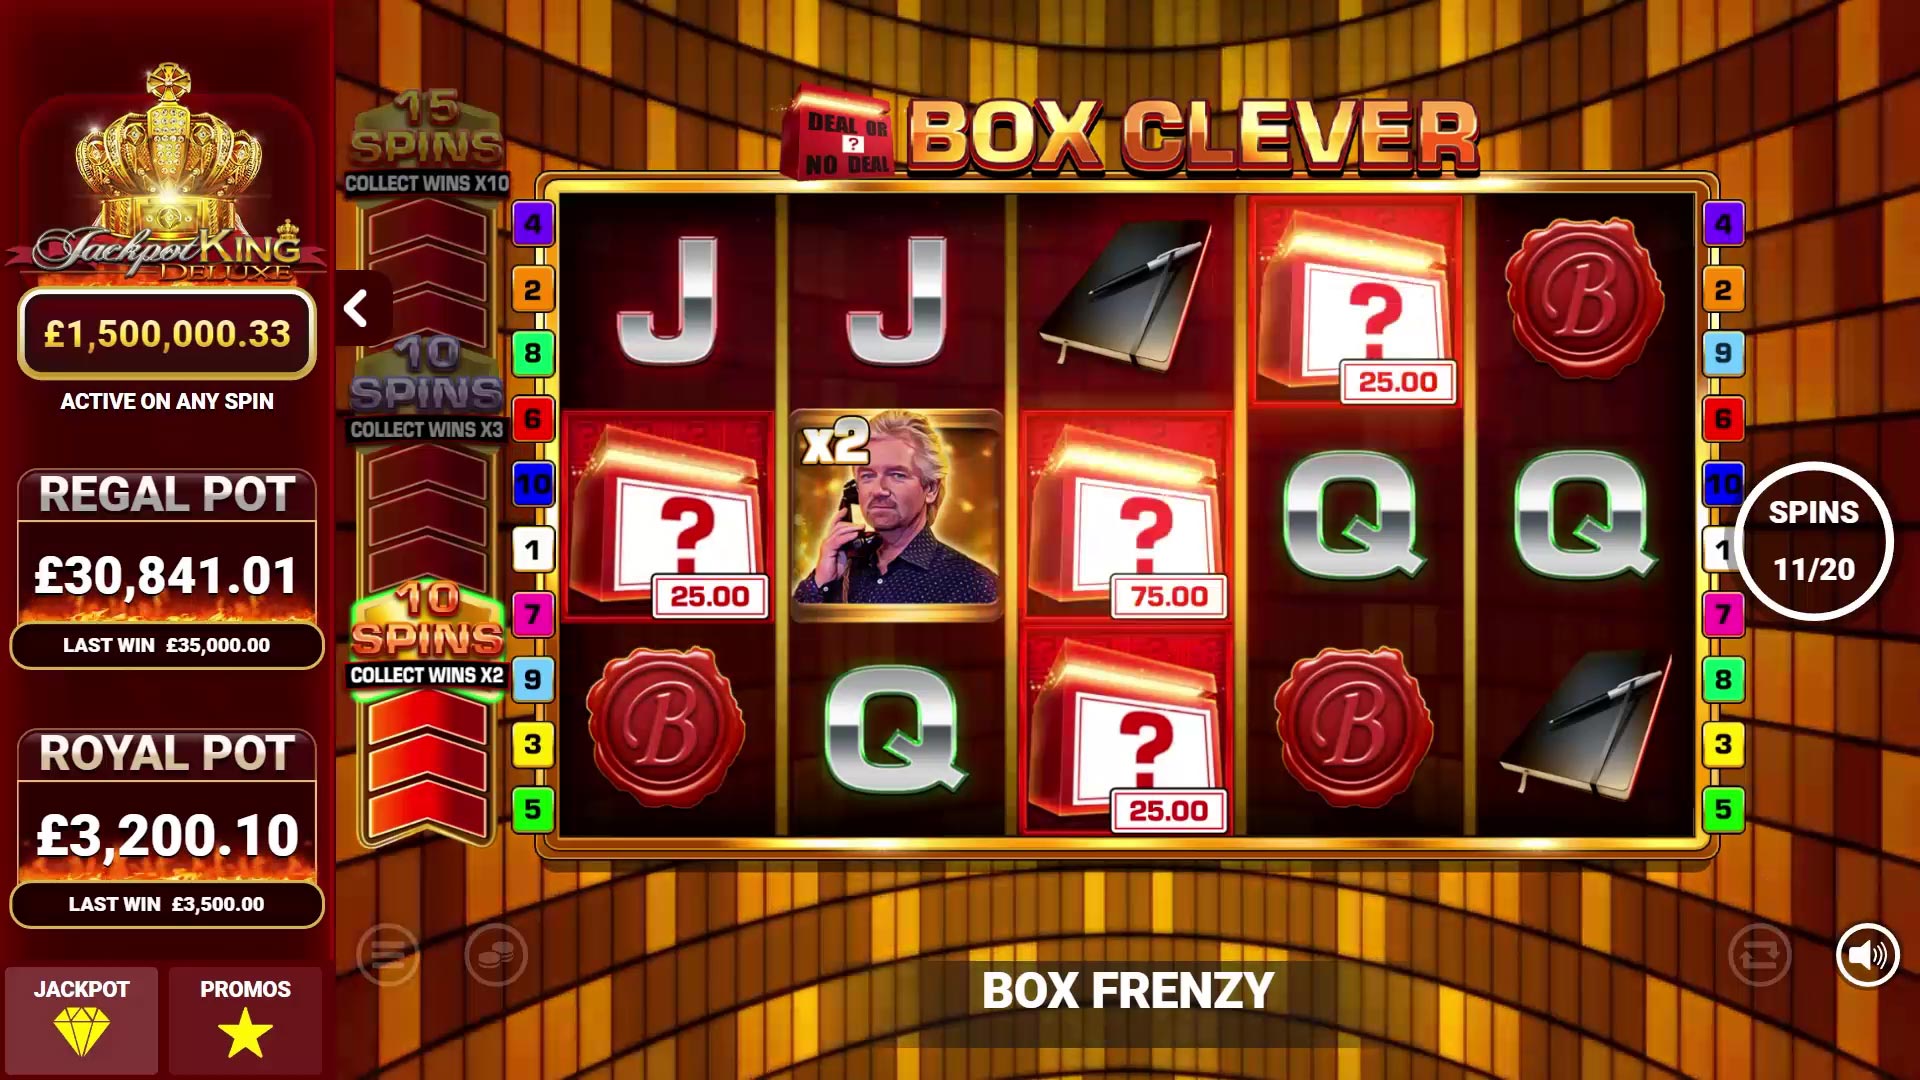 DEAL OR NO DEAL BOX CLEVER